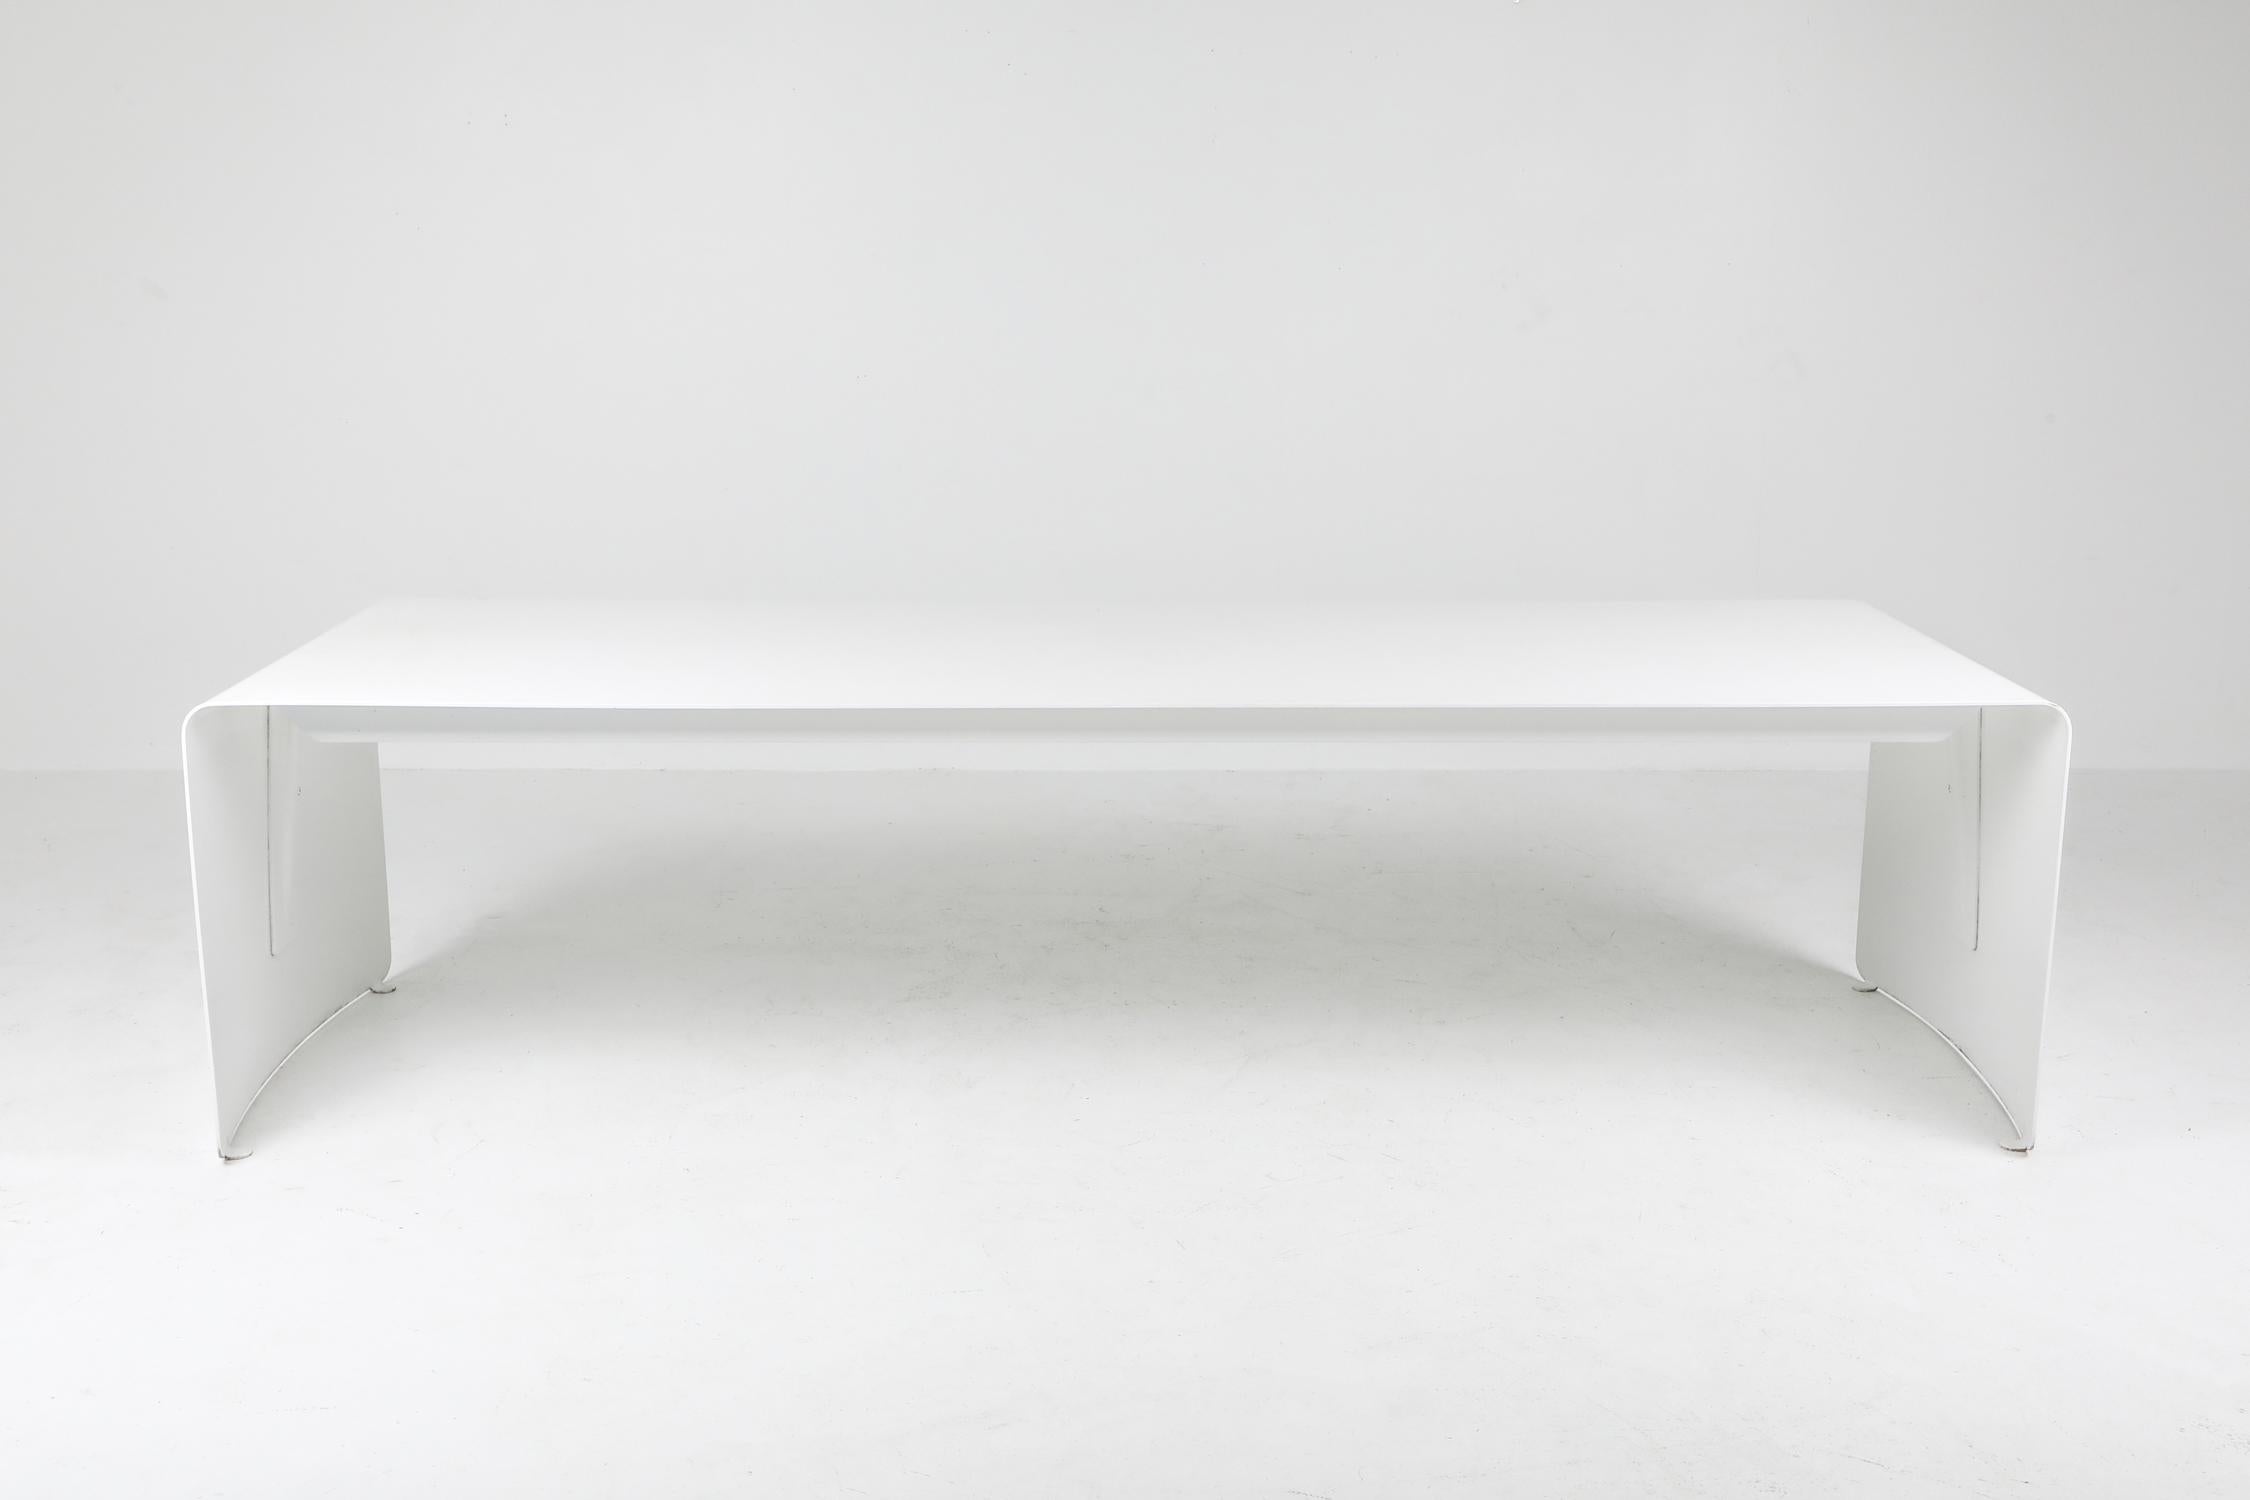 White lacquered table, Xavier lust, MDF Italia, 2002

A table made with a curved aluminium sheet. Finish gloss white lacquered. Suitable for outdoor.
Born on 27.08.1969 in Brugge (Belgium), Xavier Lust graduated from the 'Institut St Luc'-